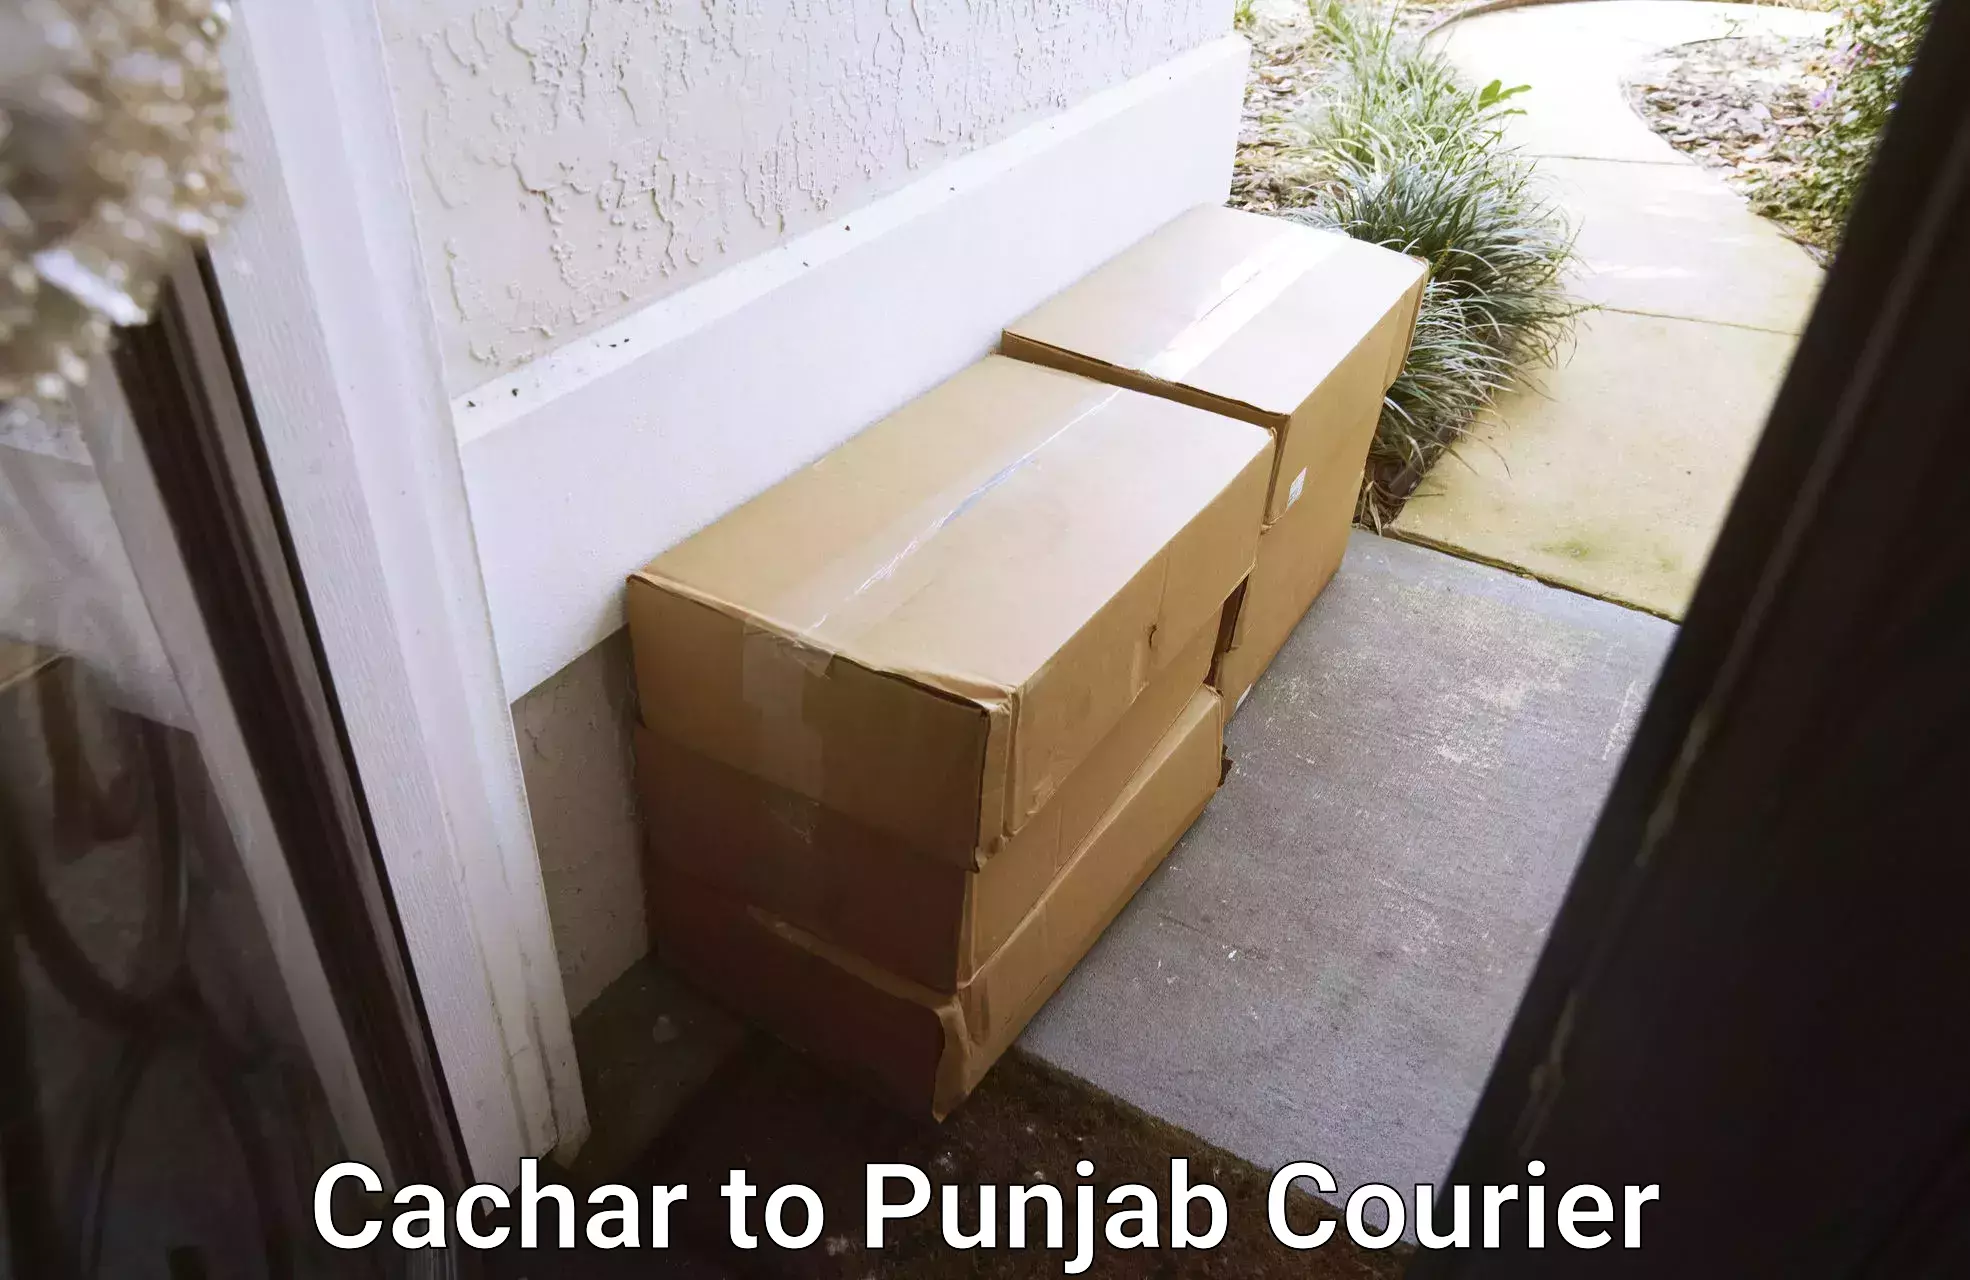 Personal parcel delivery Cachar to Ludhiana